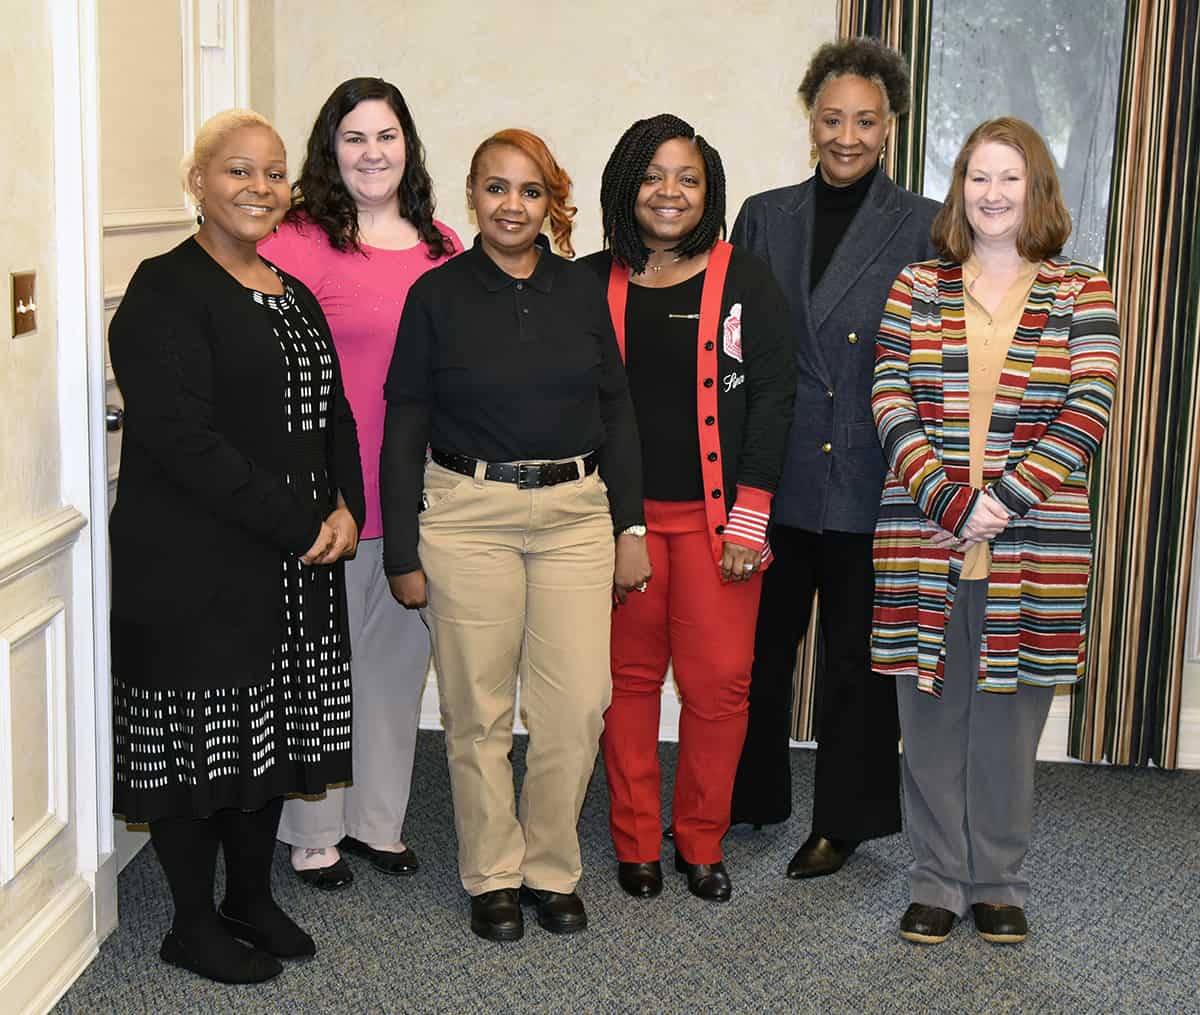 Pictured are members of the SGTC advisory committee for accounting and business technology: Dr. Andrea Oates, SGTC Academic Dean; April Hilliard, SGTC Academic Affairs Administrative Assistant; Willette Smith, Macon State Prison; Deatrice Harris, Sumter YDC; Brenda Boone, SGTC Accounting instructor; and Jamie Campbell, Wells Fargo Bank.